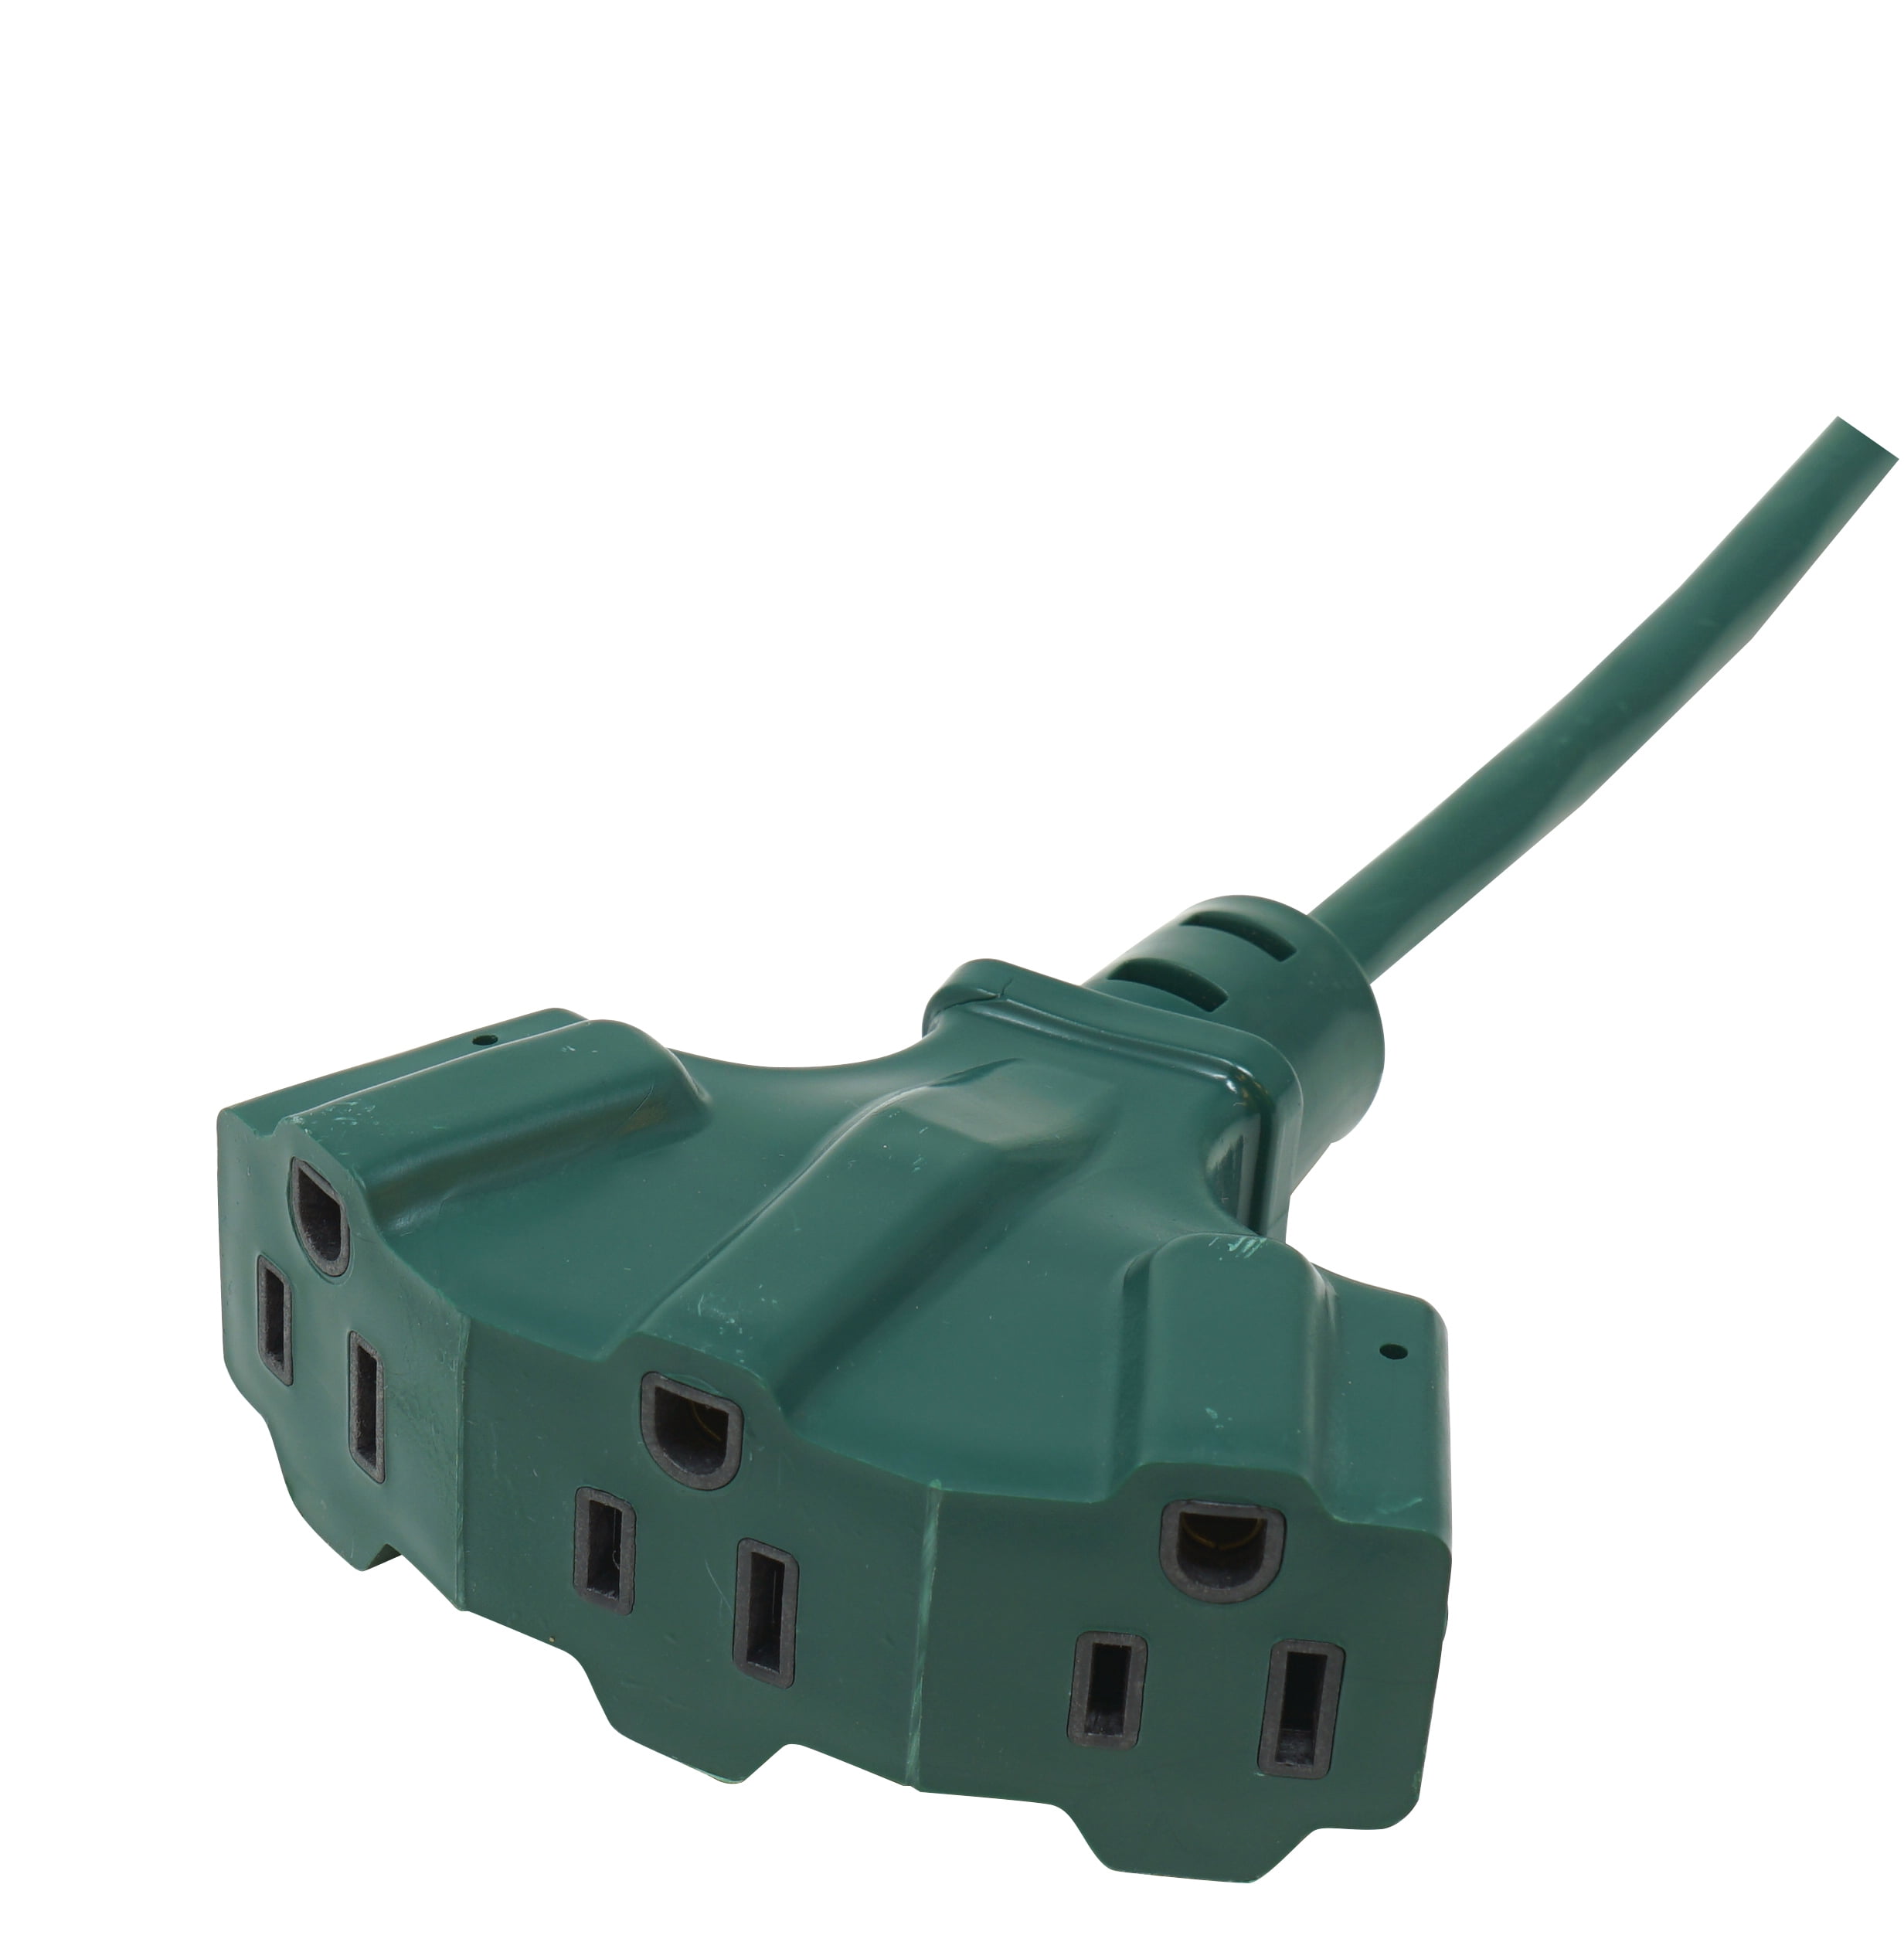 Woods 984413 25-Foot Outdoor Extension Cord with 3-Outlet Power Block Green 